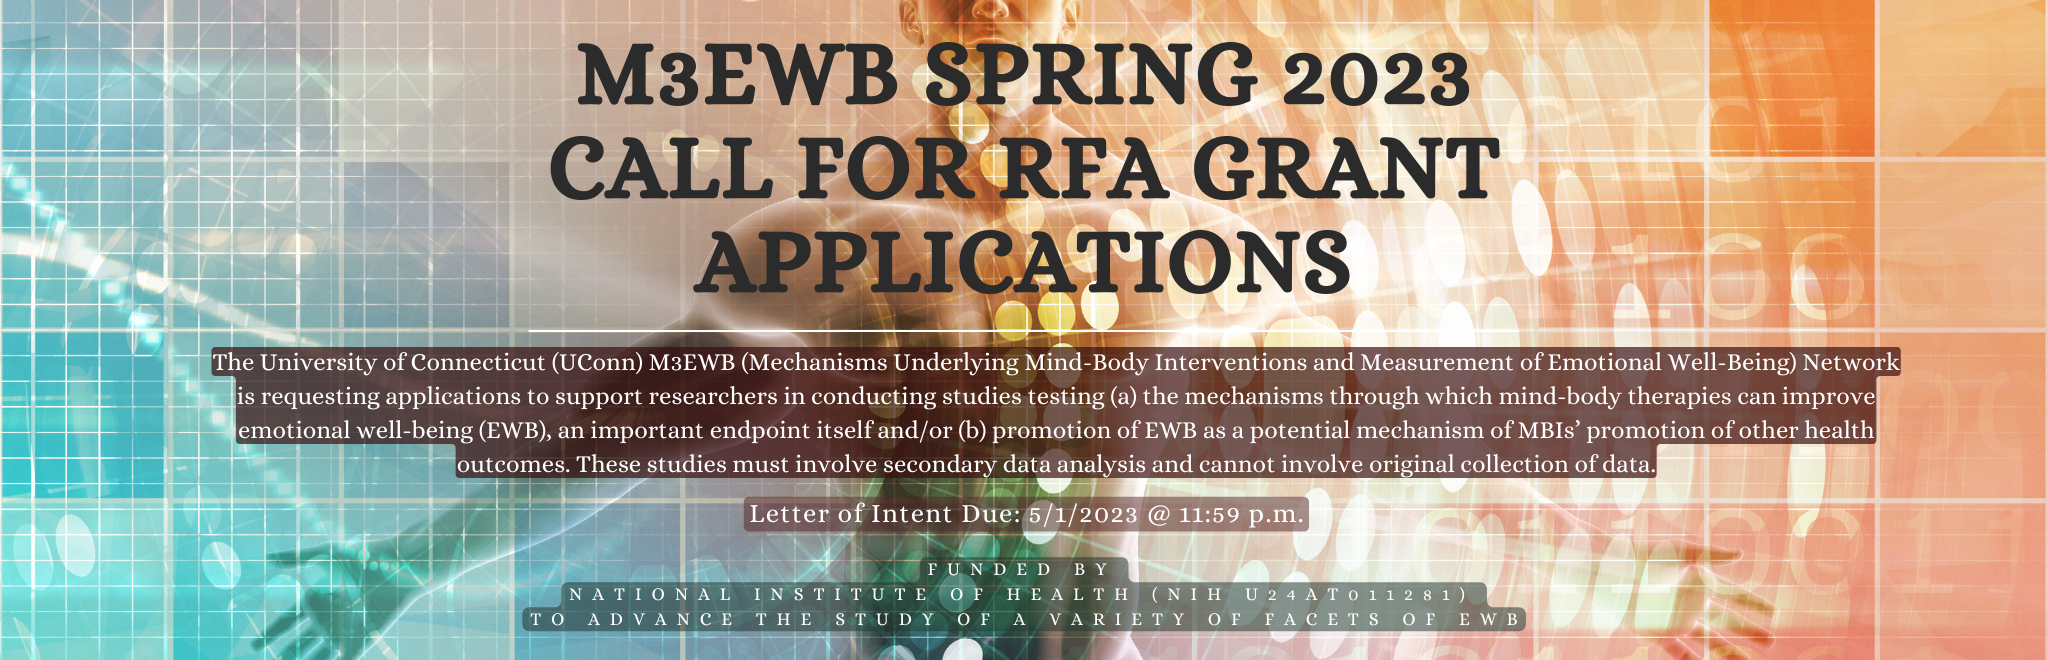 Spring 2023 Call for RFA Grant Applications